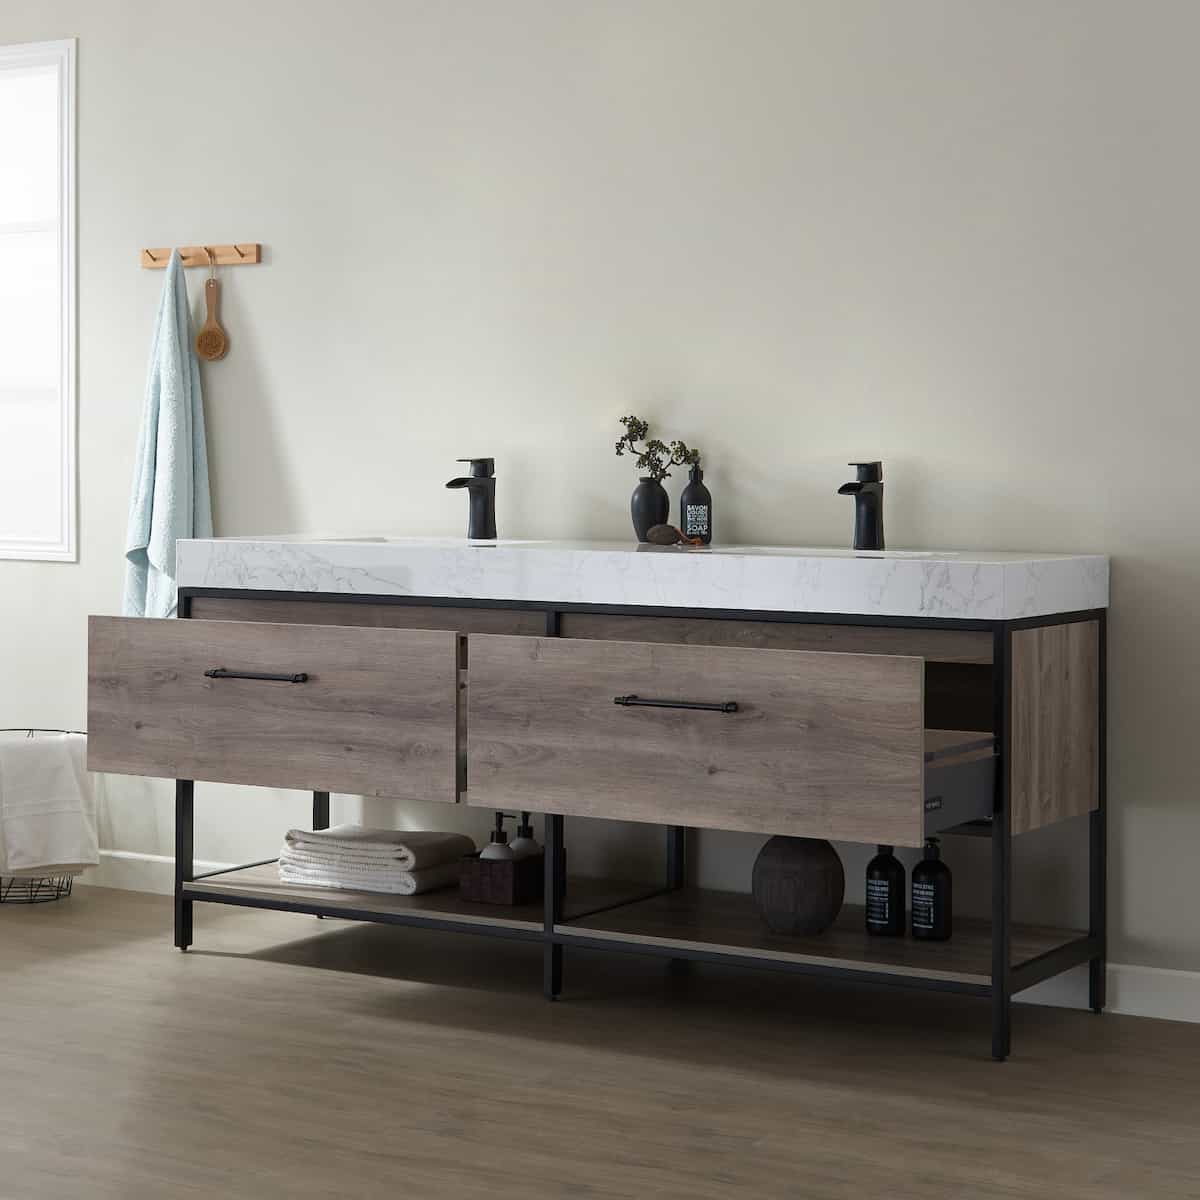 Vinnova Palma 72 Inch Freestanding Double Vanity in Mexican Oak with White Composite Grain Stone Countertop Without Mirrors Drawers 701272-MXO-GW-NM